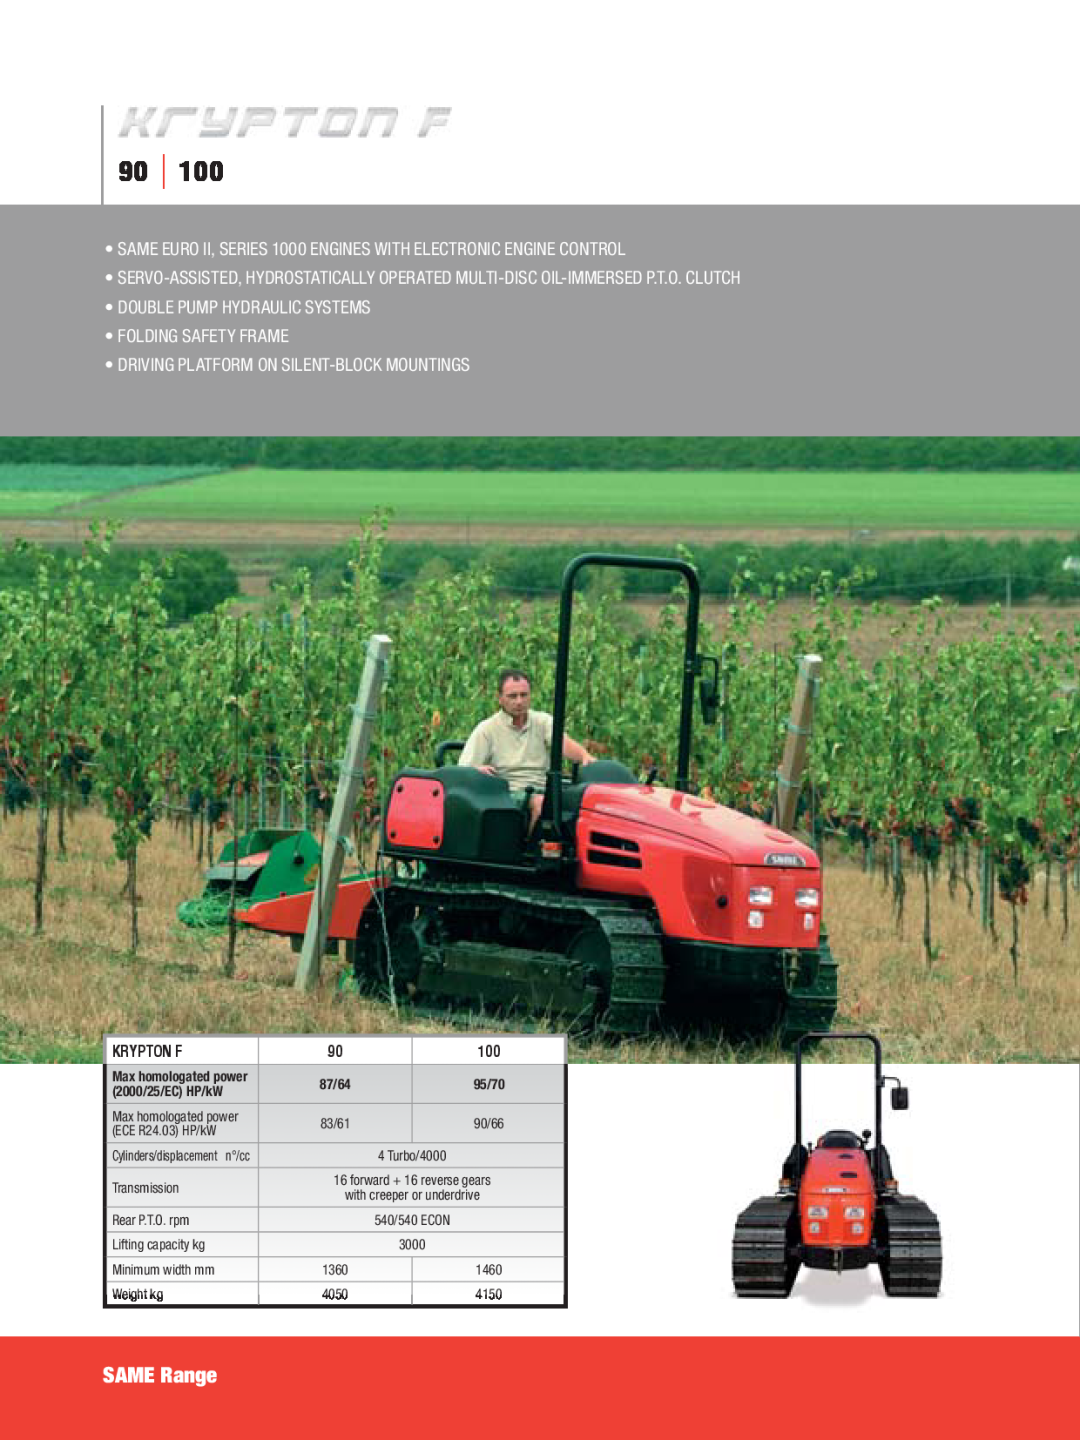 SAME Tractors manual SAME Range, •Double Pump Hydraulic Systems, •Folding Safety Frame 